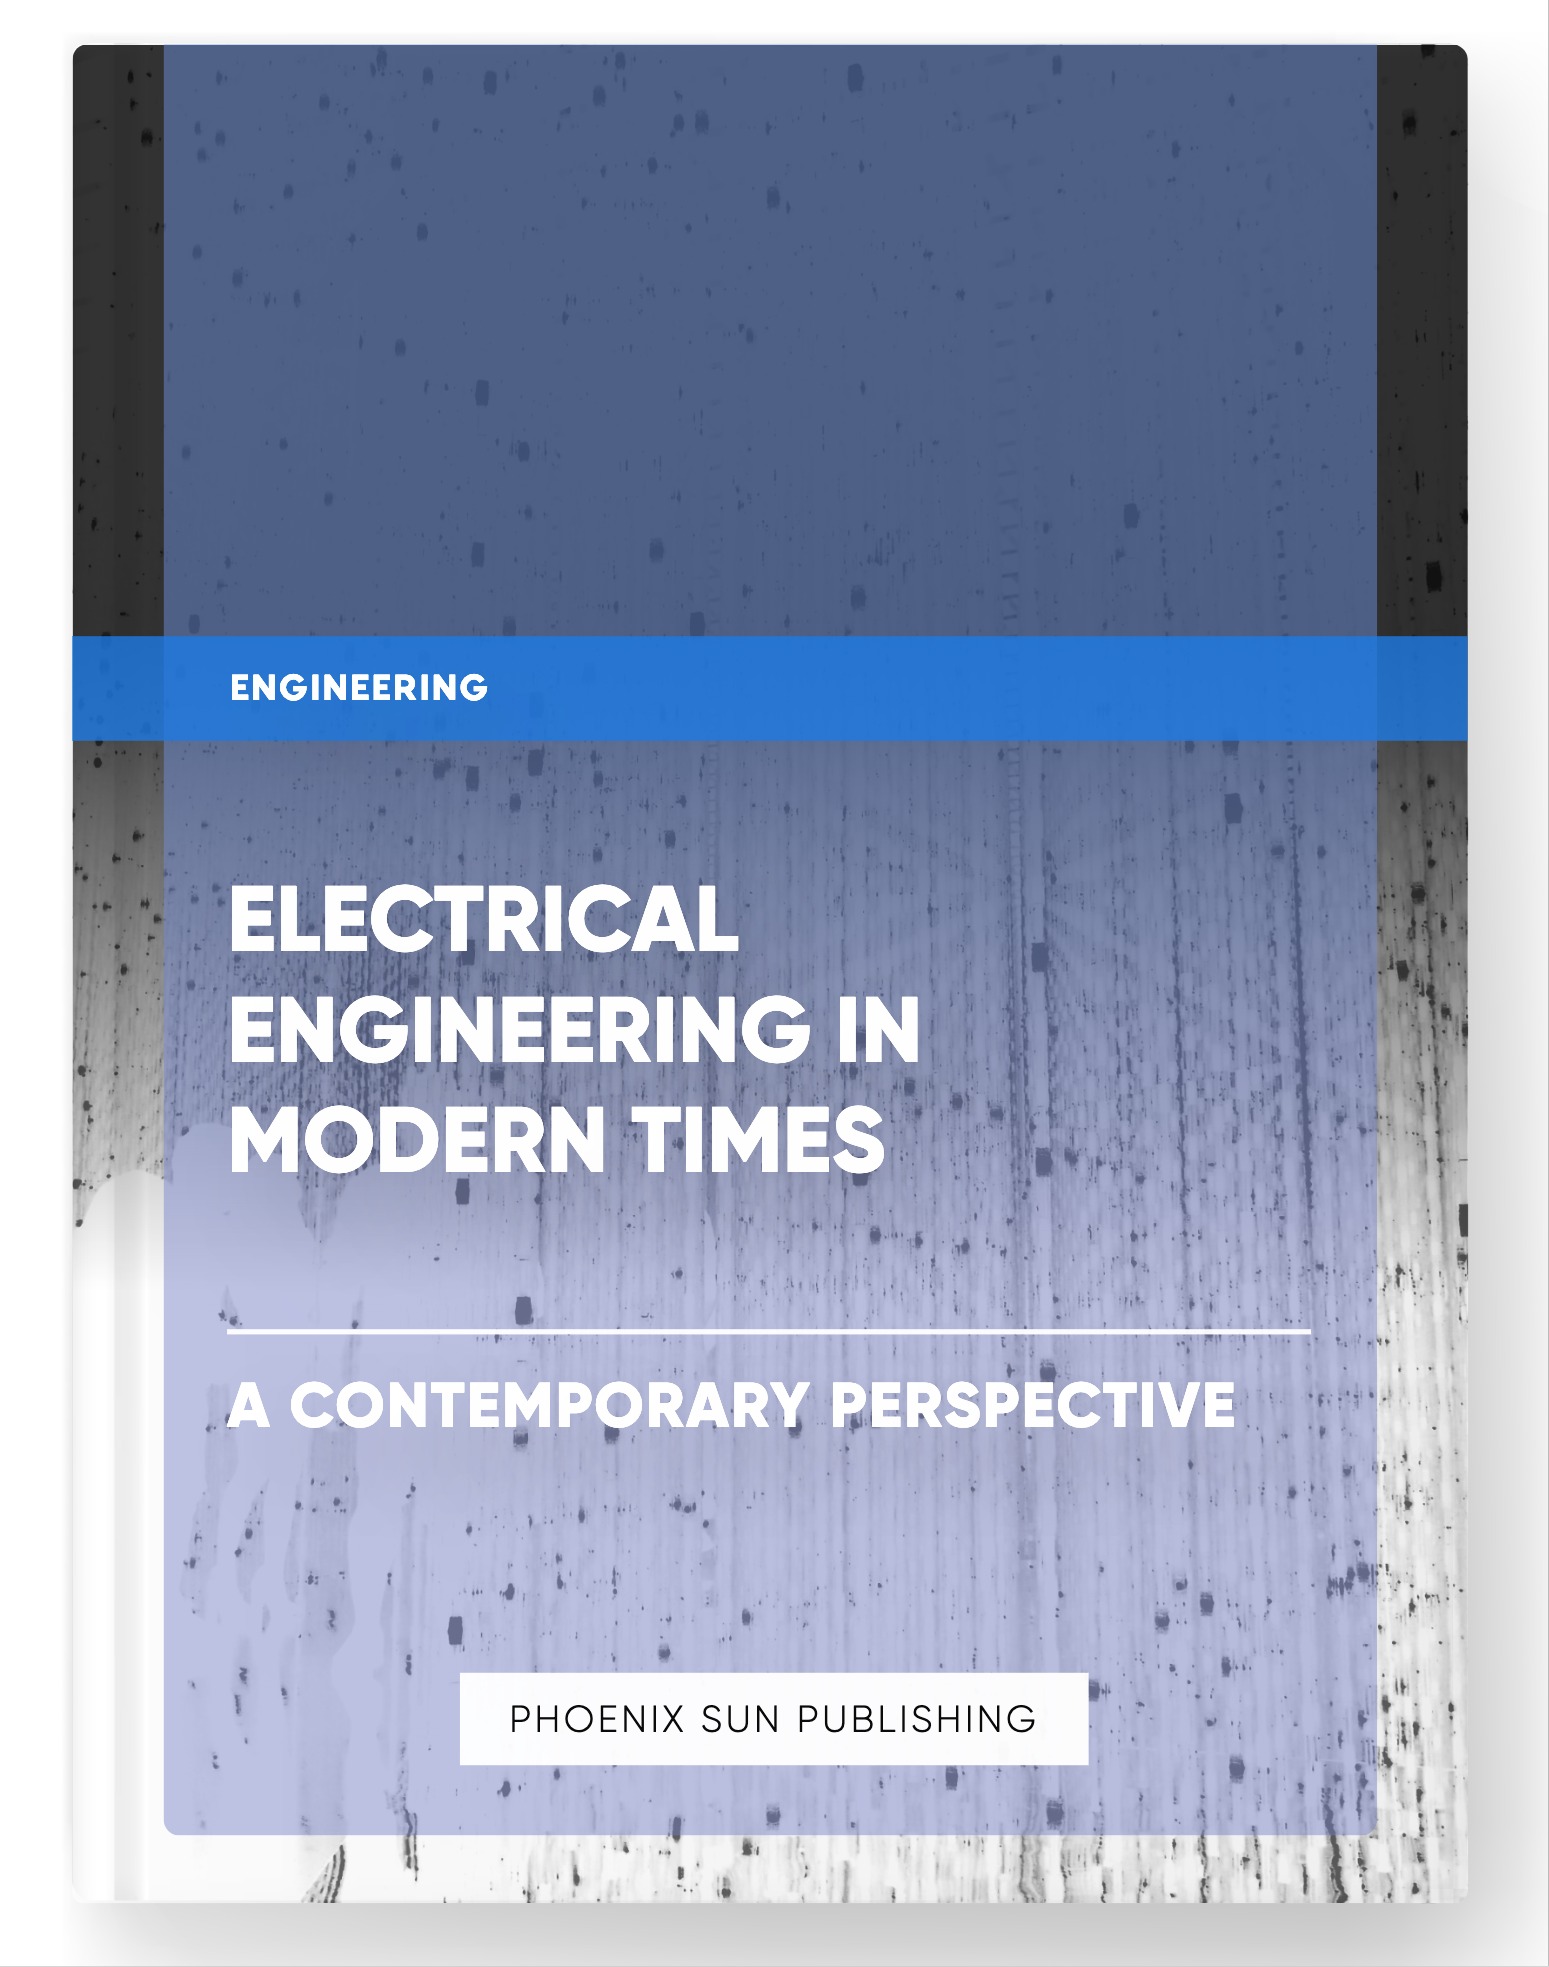 Electrical Engineering in Modern Times – A Contemporary Perspective